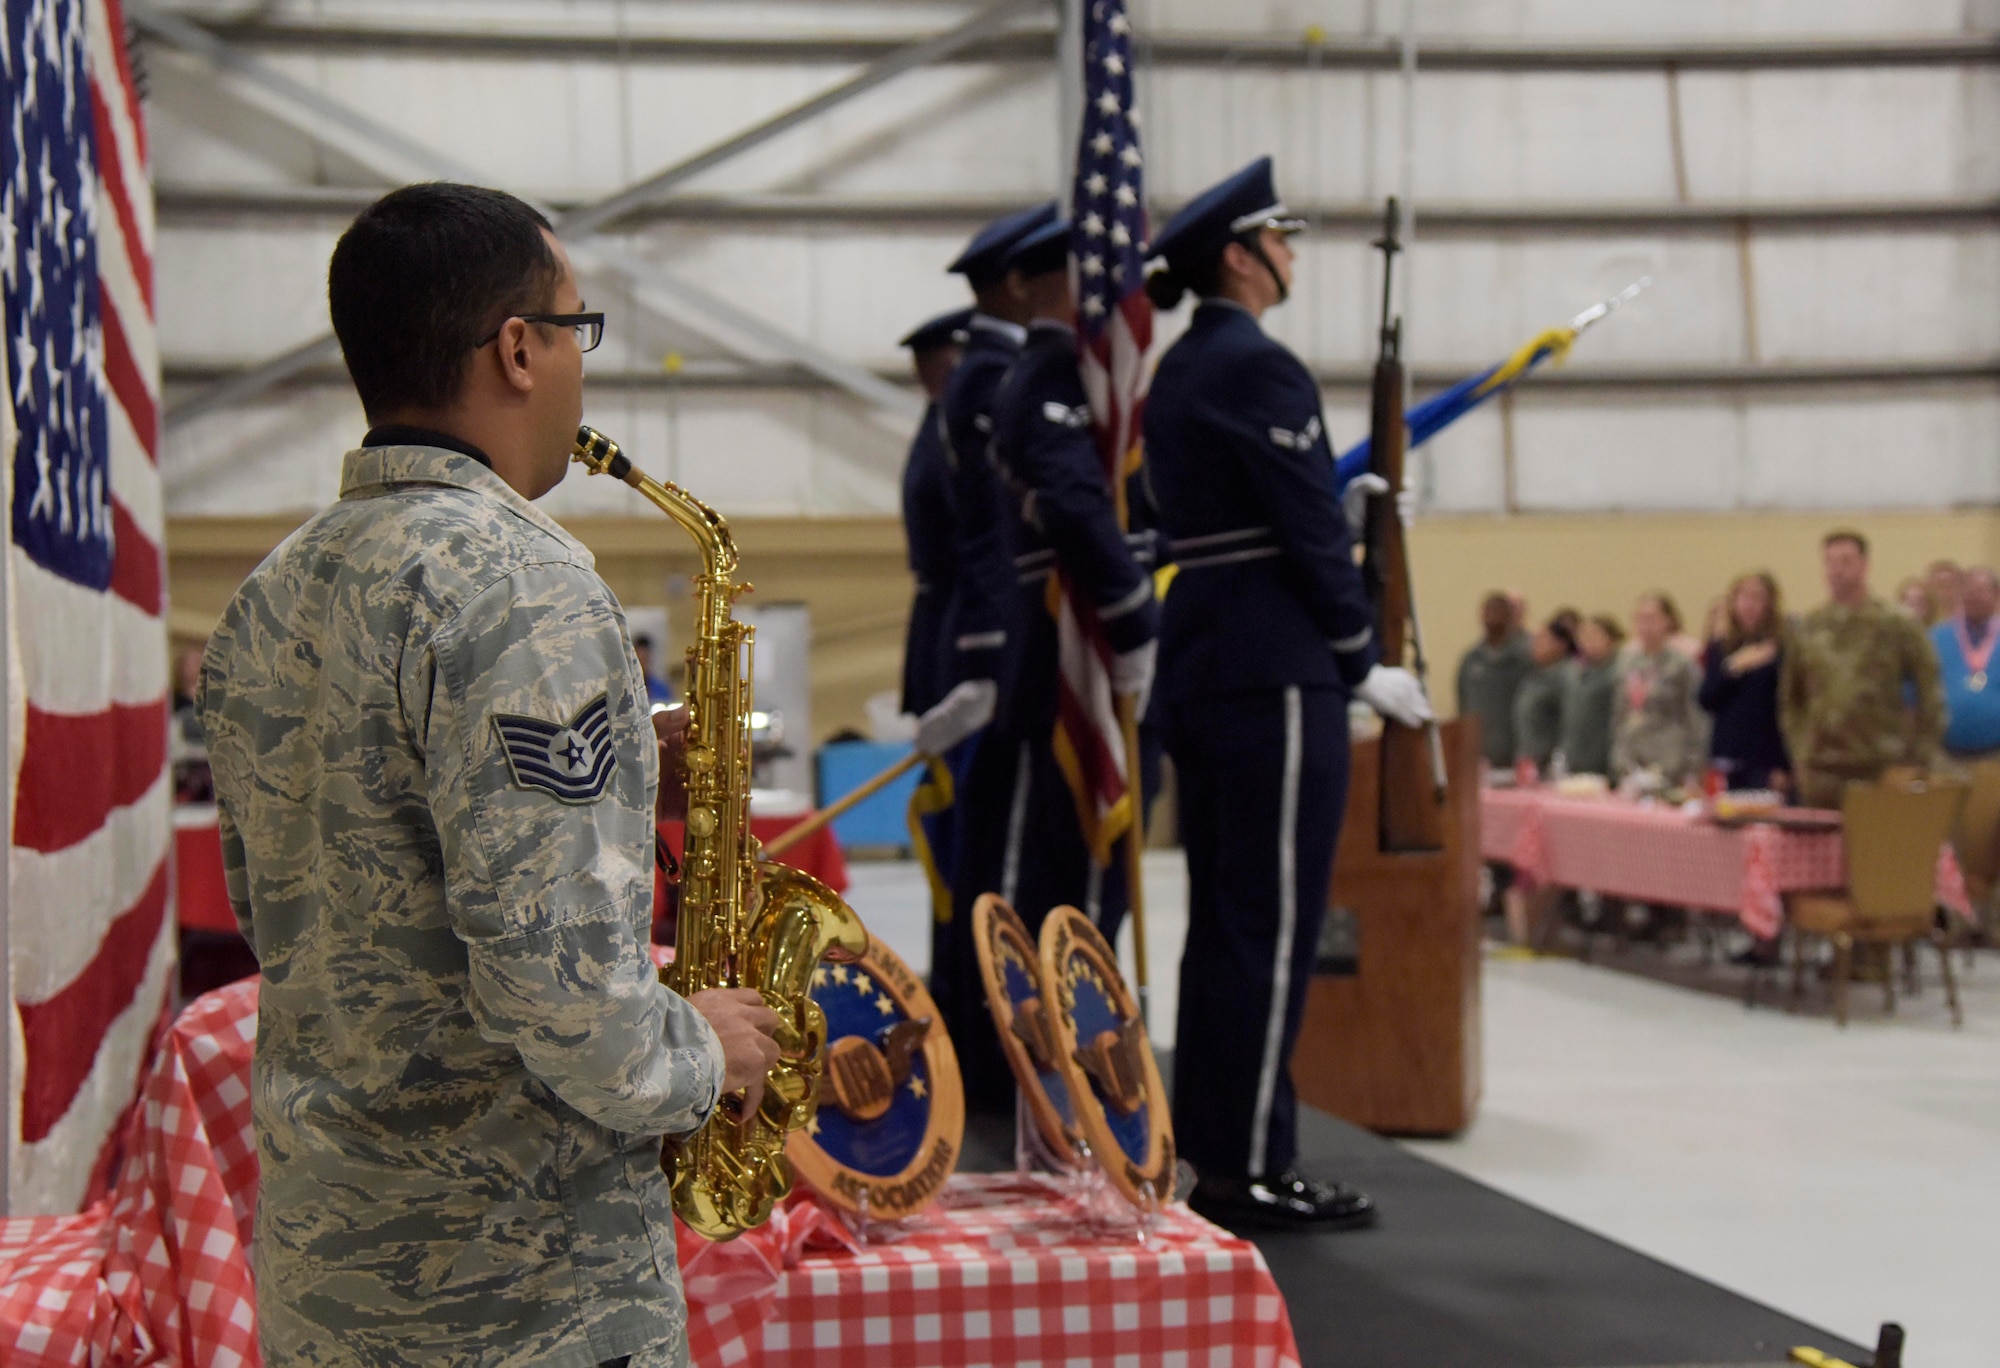 U.S. Air Force Tech. Sgt. Javier Trujillo, 334th Training Squadron instructor, plays the national anthem with his saxophone during the 81st Training Wing's 2018 Annual Awards Ceremony inside a hangar at Keesler Air Force Base, Mississippi, Feb. 1, 2019. During the ceremony, base leadership recognized outstanding Airmen and civilians from across the installation for their accomplishments throughout 2018. (U.S. Air Force photo by Kemberly Groue)